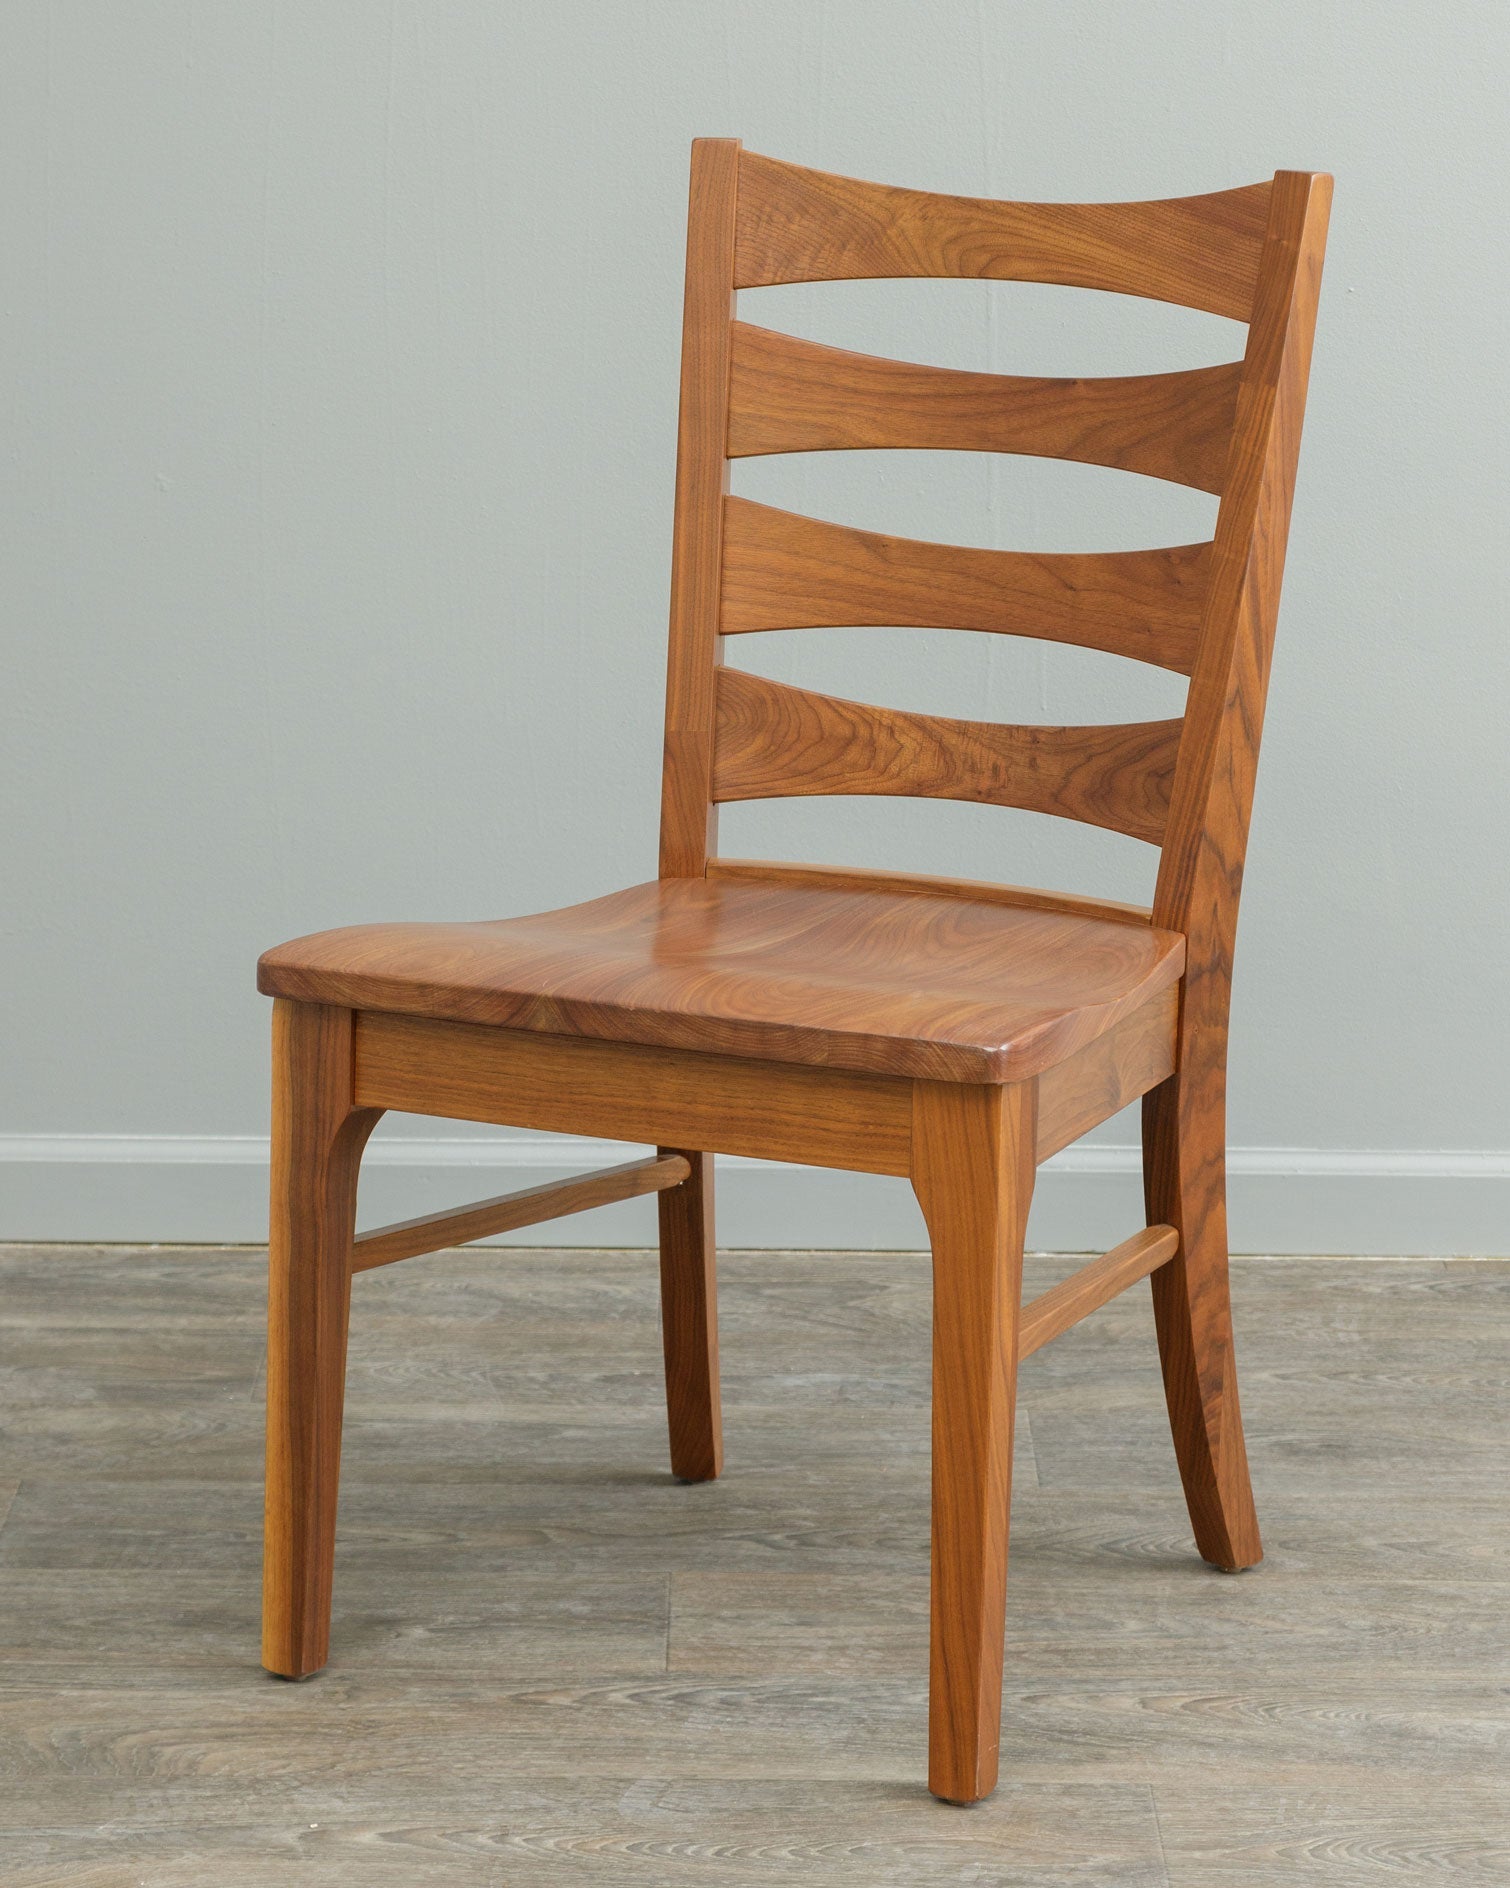 Humboldt Straight Back Dining Chairs - Countryside Amish Furniture